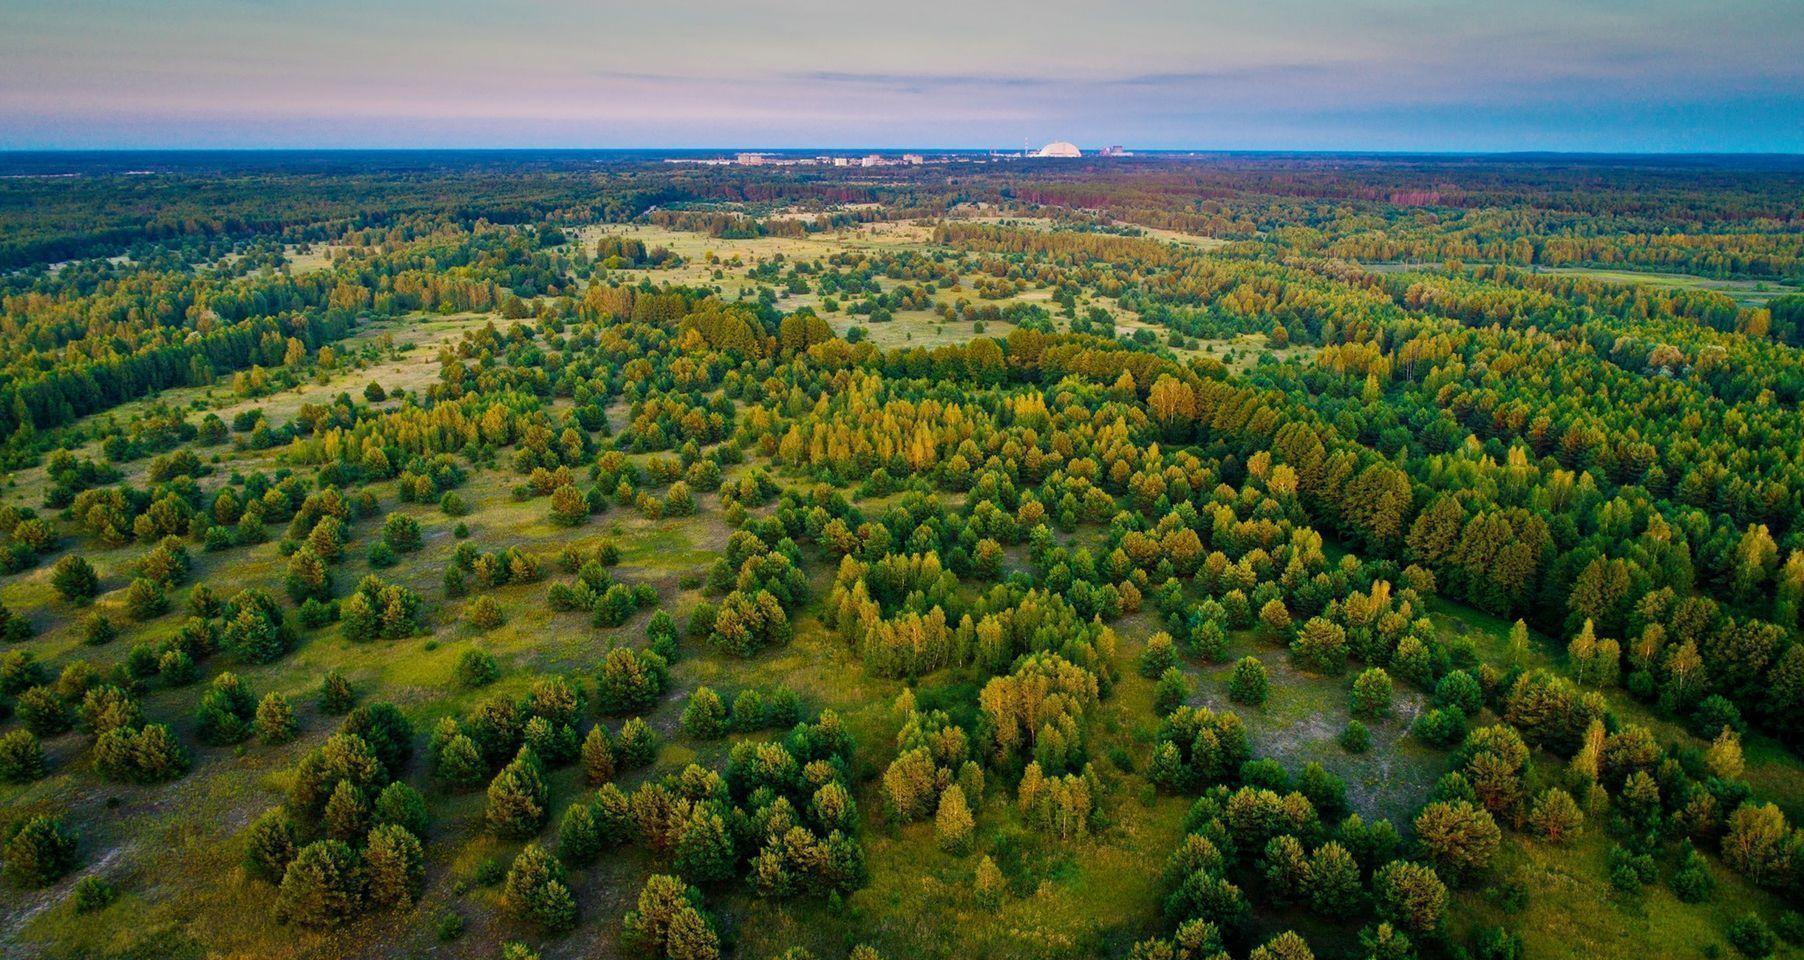 The government handed over 226,964.7 ha for permanent use to the Chornobyl Radiation-Ecological Biosphere Reserve